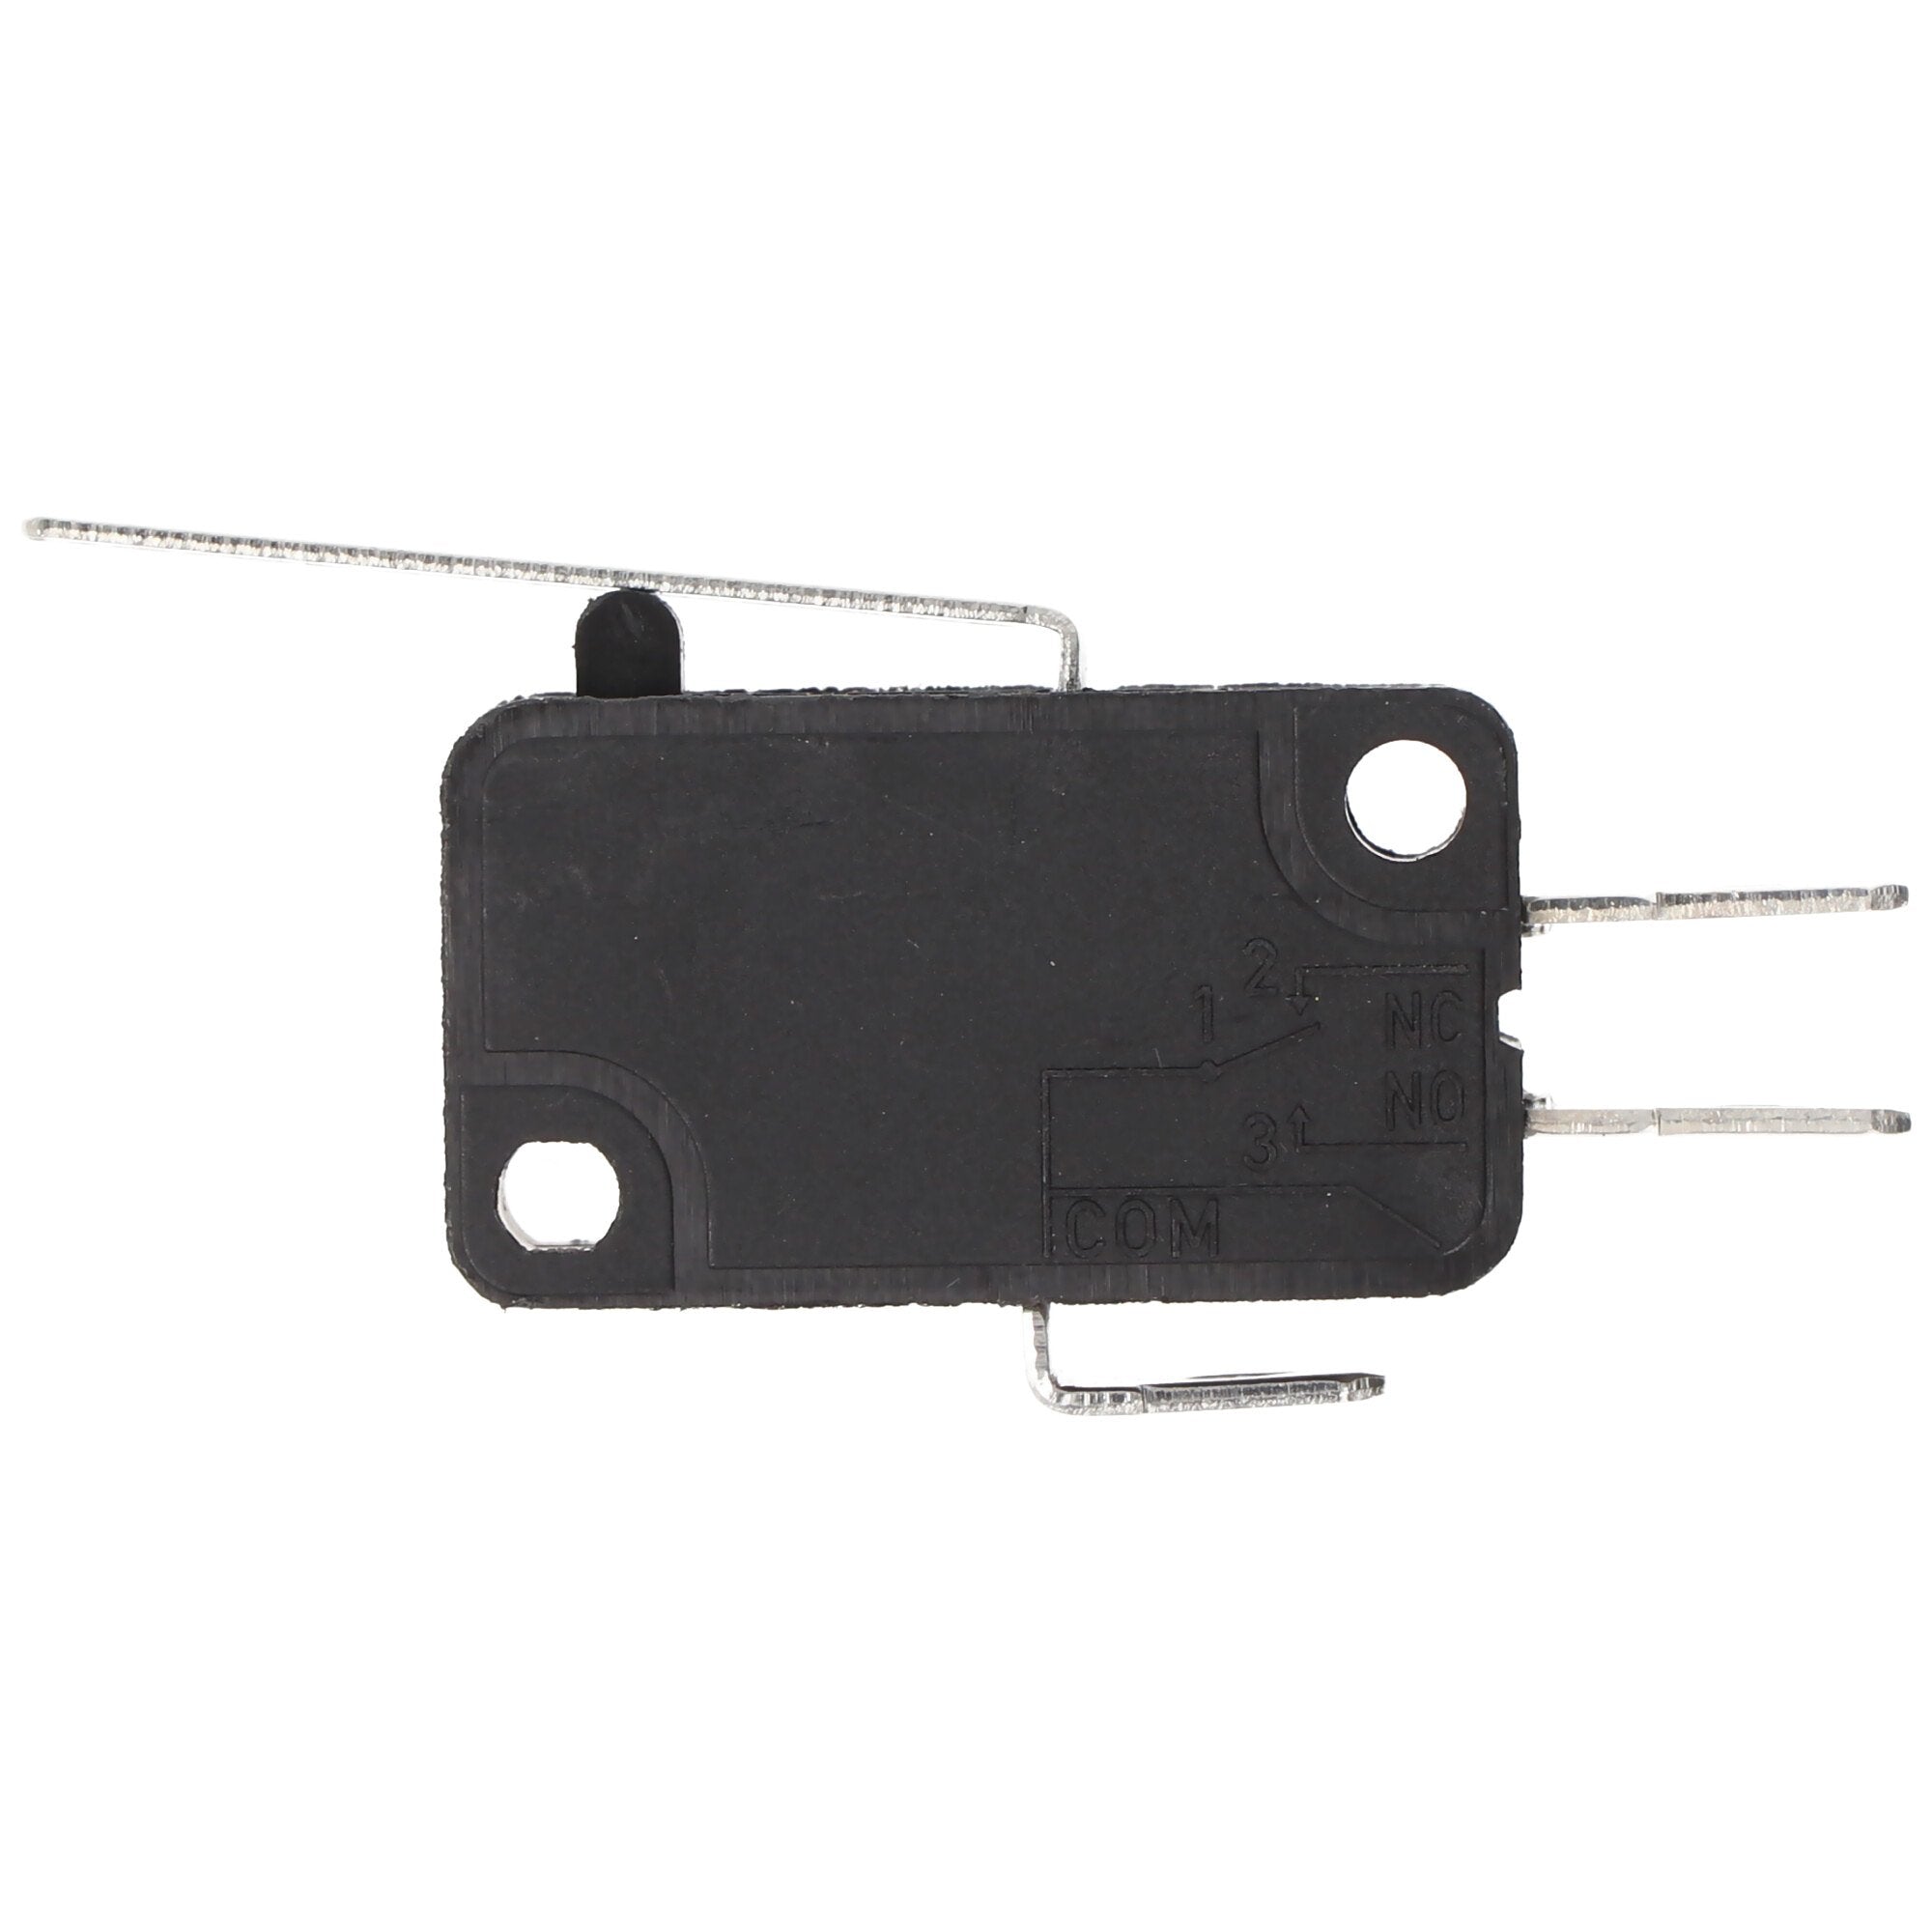 Goobay microswitch - changeover switch, 1-pole - with a straight lever